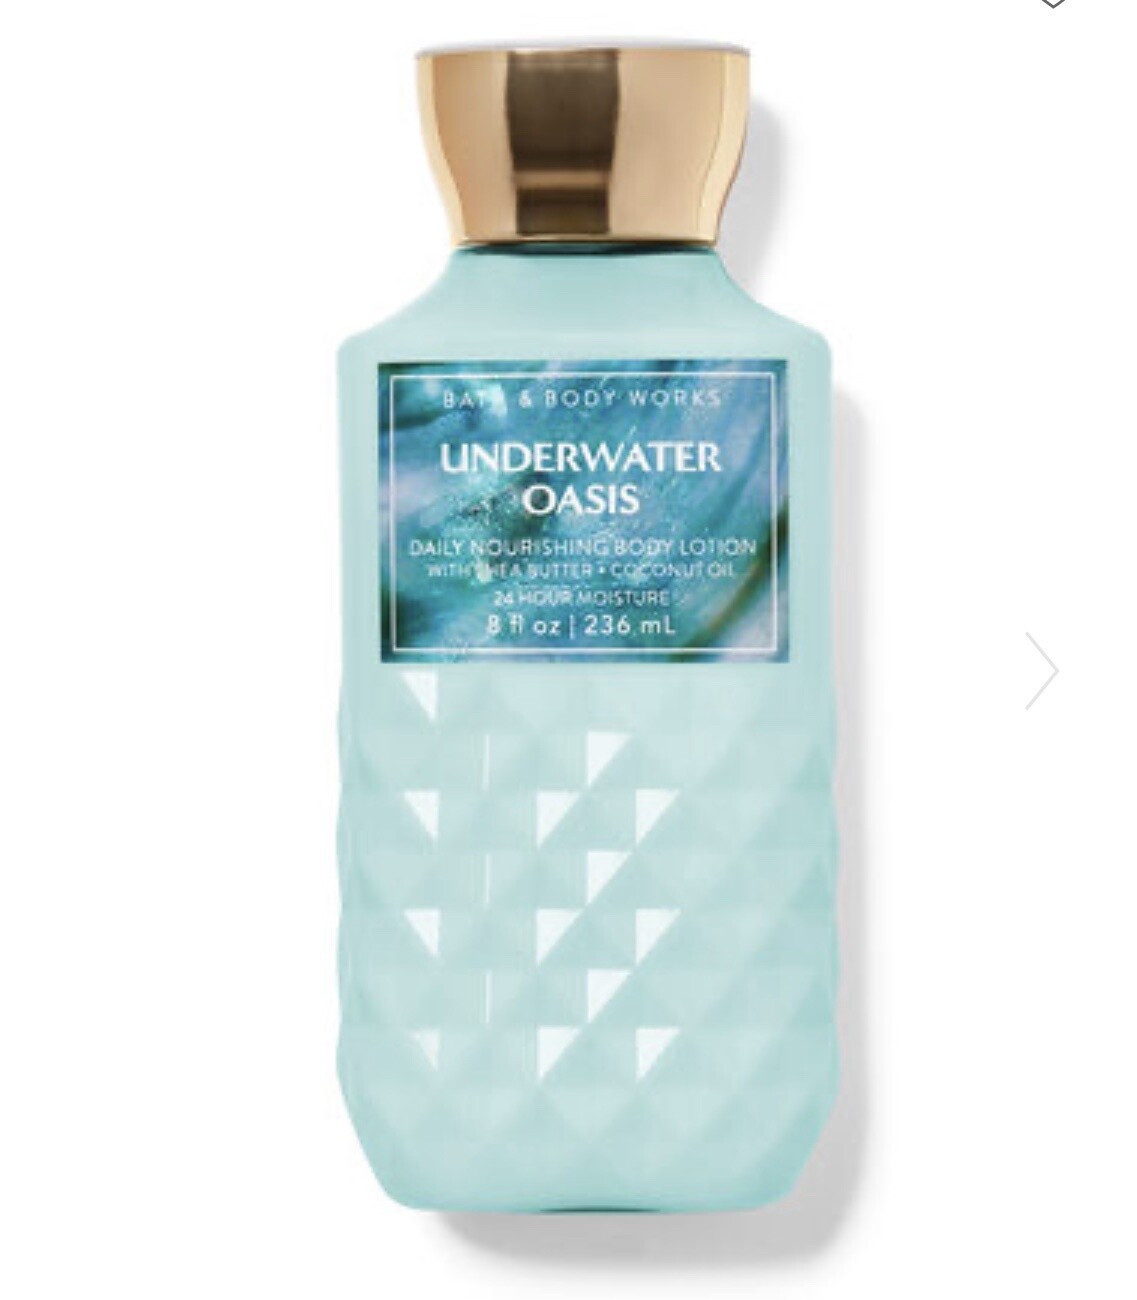 Underwater Oasis Body Lotion